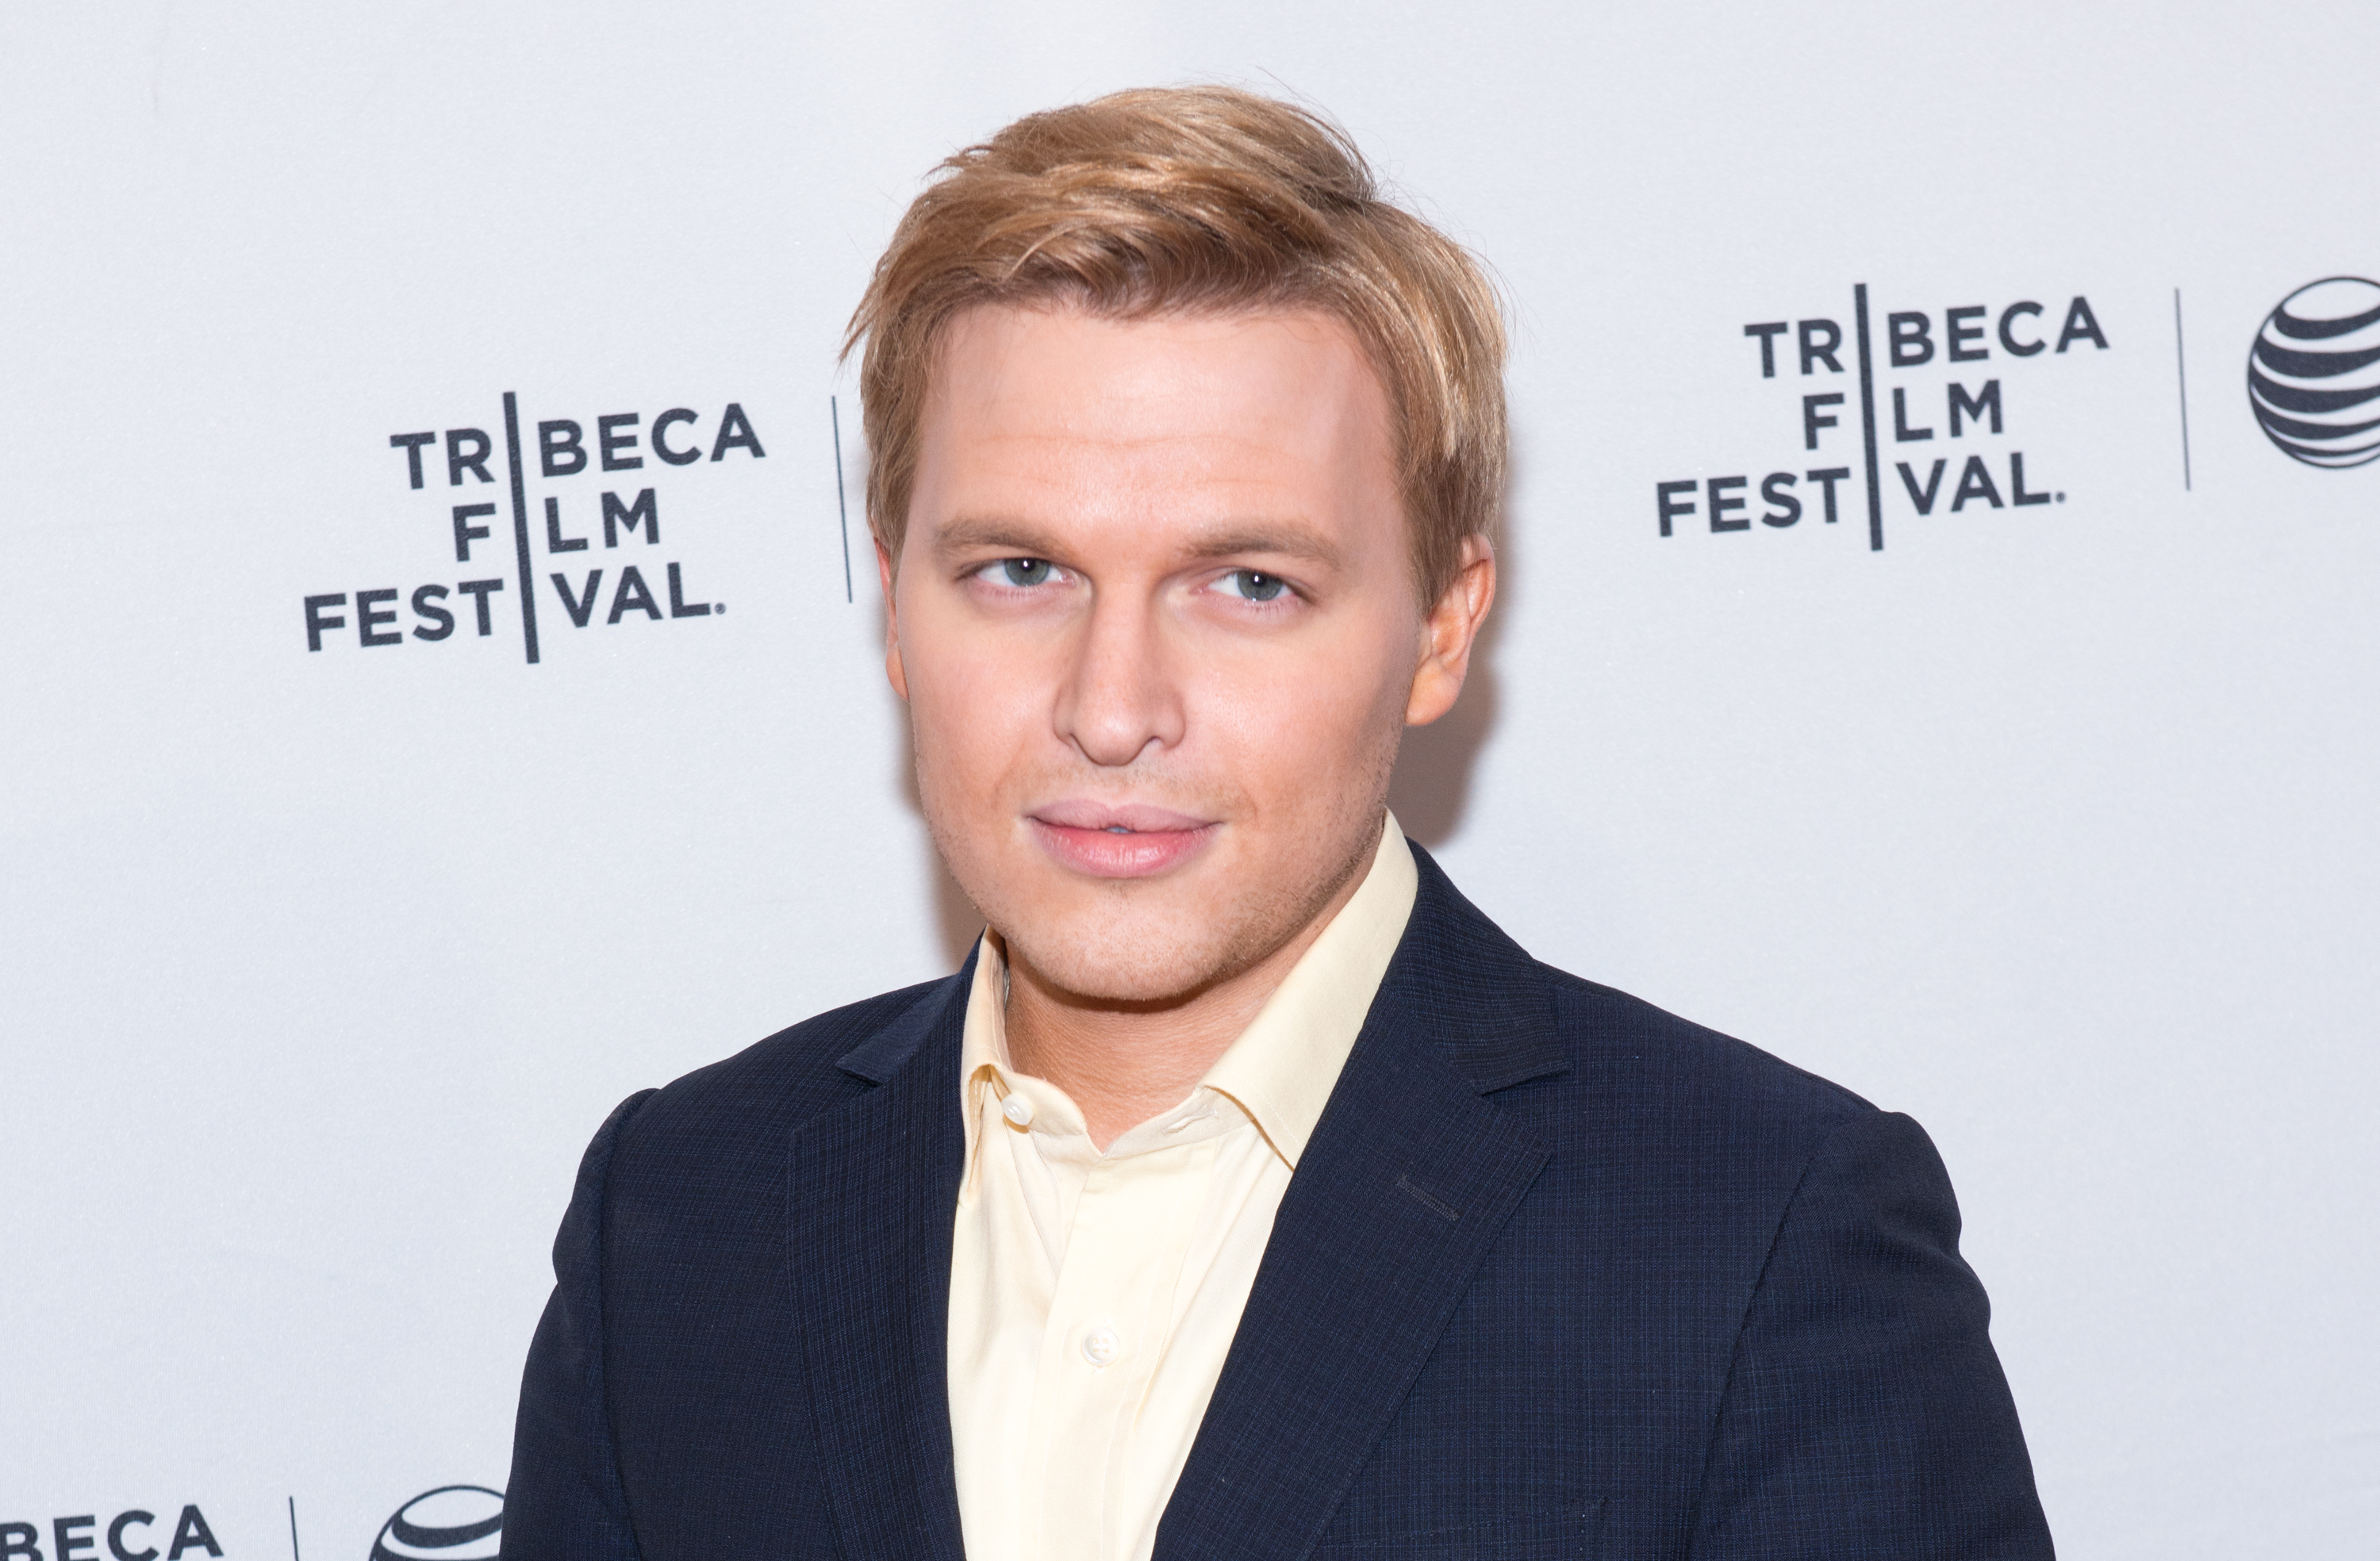 Ronan Farrow attends 'The Diplomat' premiere during the 2015 Tribeca Film Festival at SVA Theater 1 in New York City on April 23, 2015. (Noam Galai—WireImage/Getty)